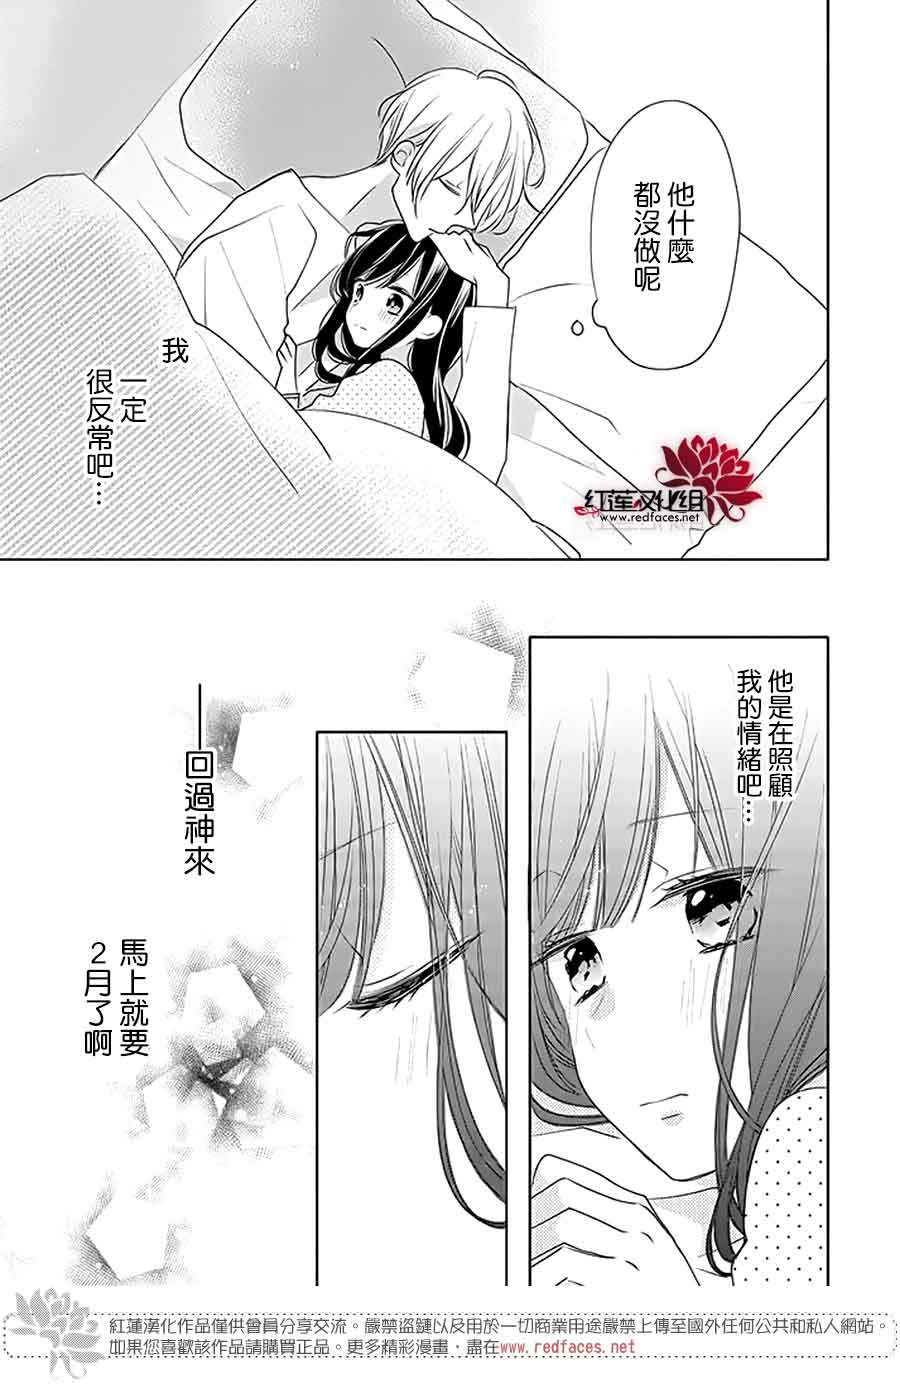 If given a second chance - 26話 - 1